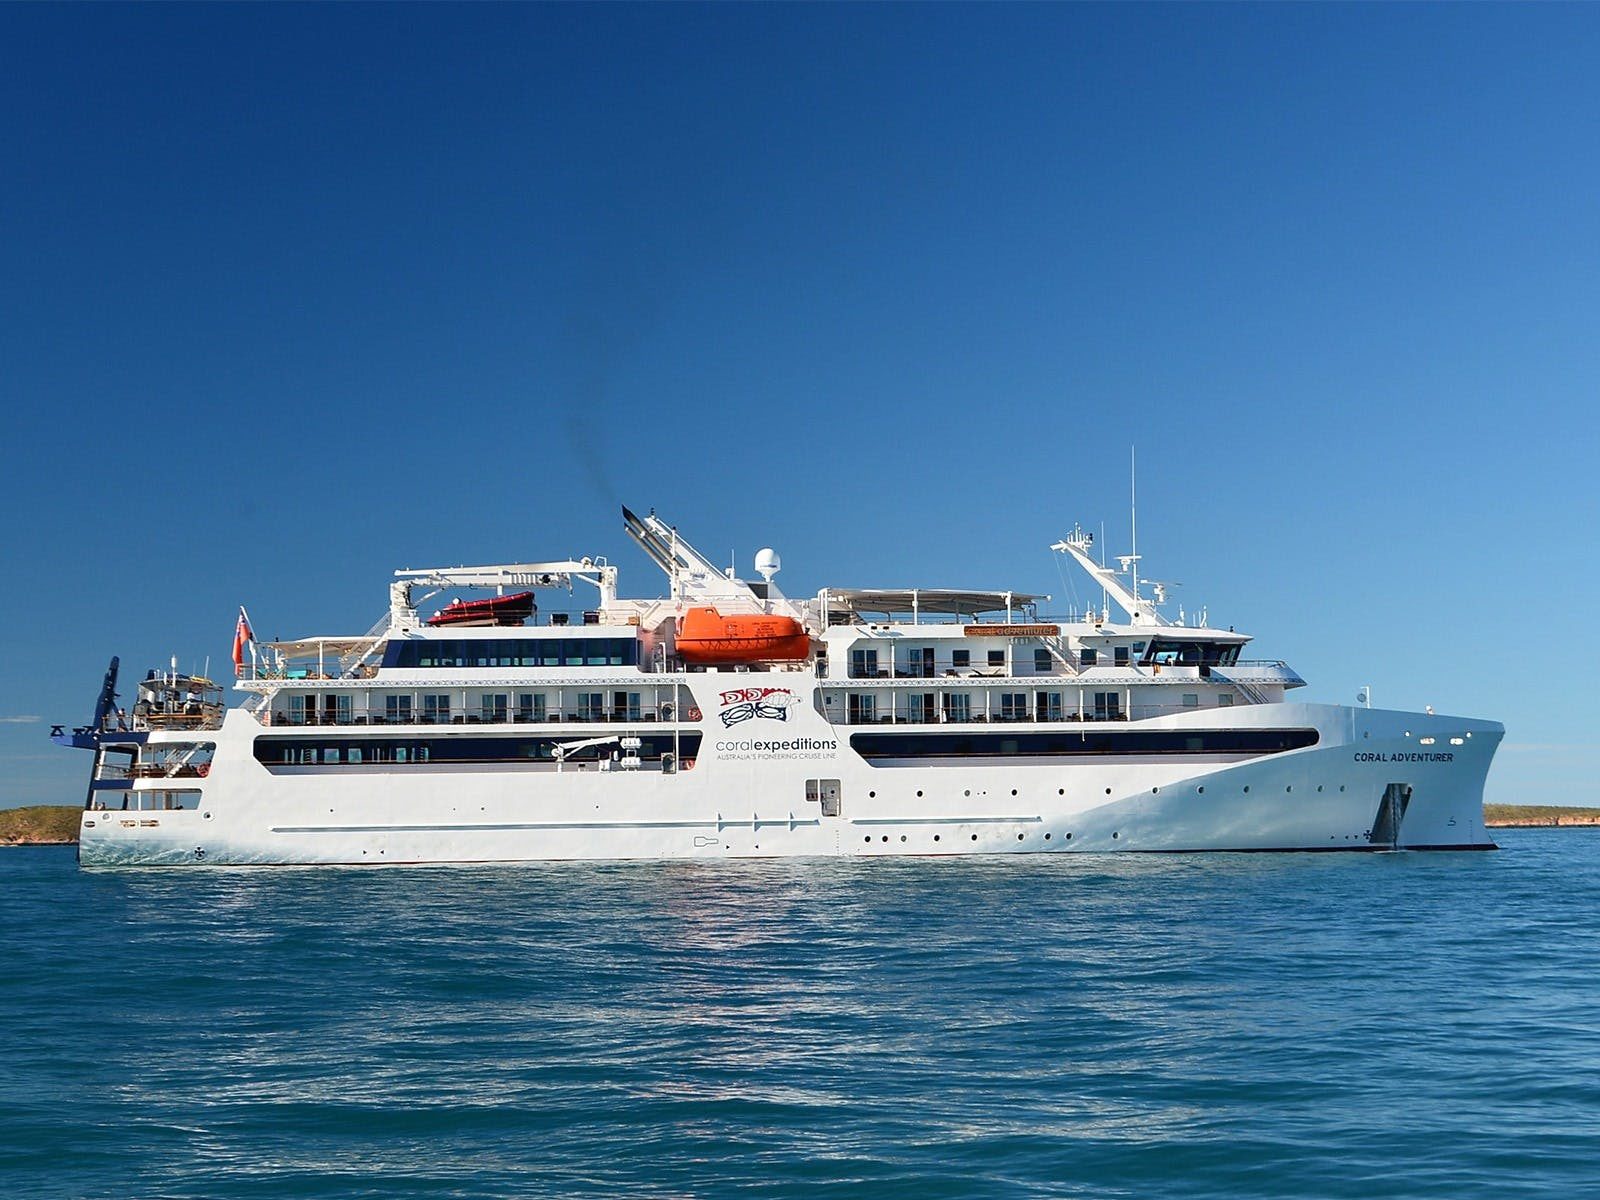 Coral Expeditions, Spearwood, Western Australia